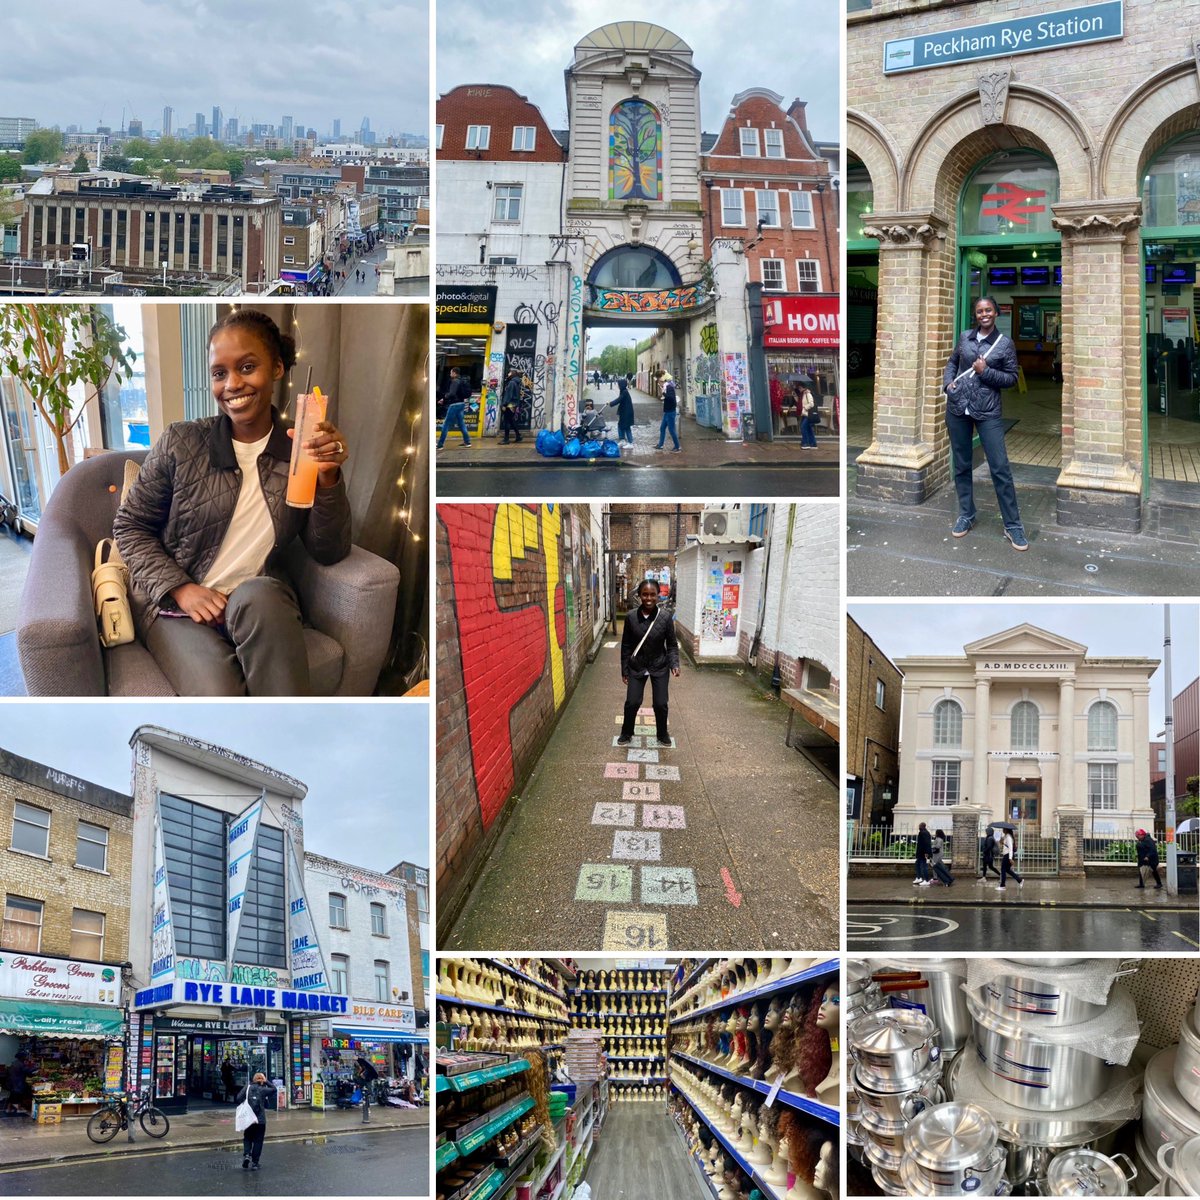 Coco promised me a surprise for Bank Holiday Monday - turned out to be a trip to Peckham… Yes, south of the river. A very interesting place is one way to describe it. We had fun though.